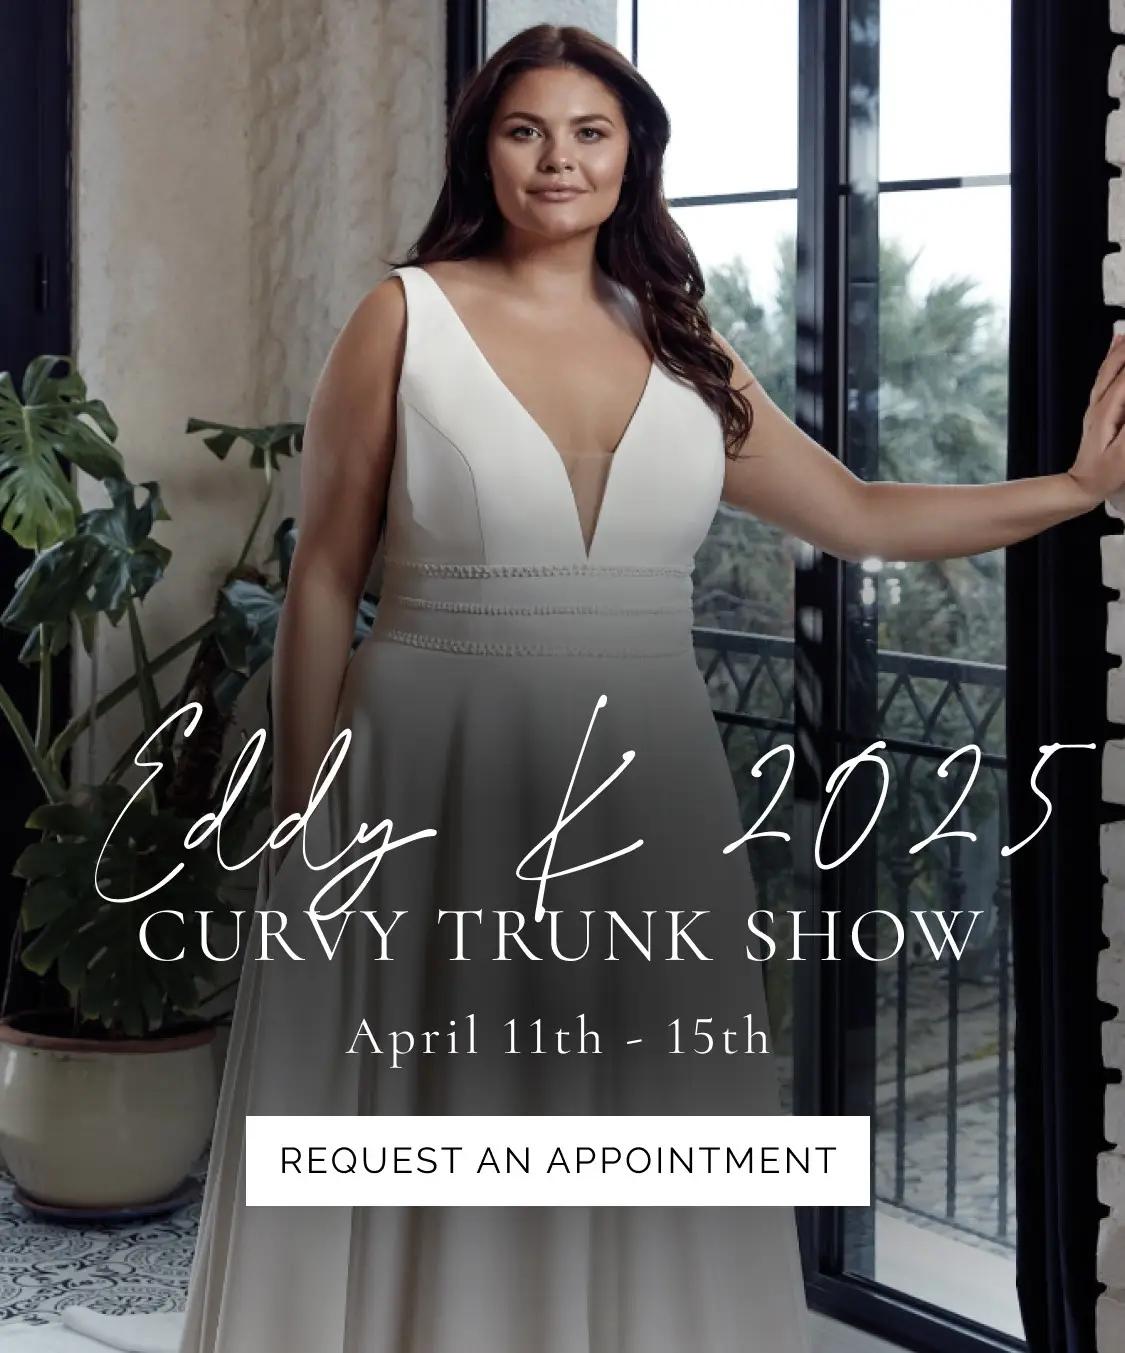 Eddy K 2025 curvy trunk show banner for mobile